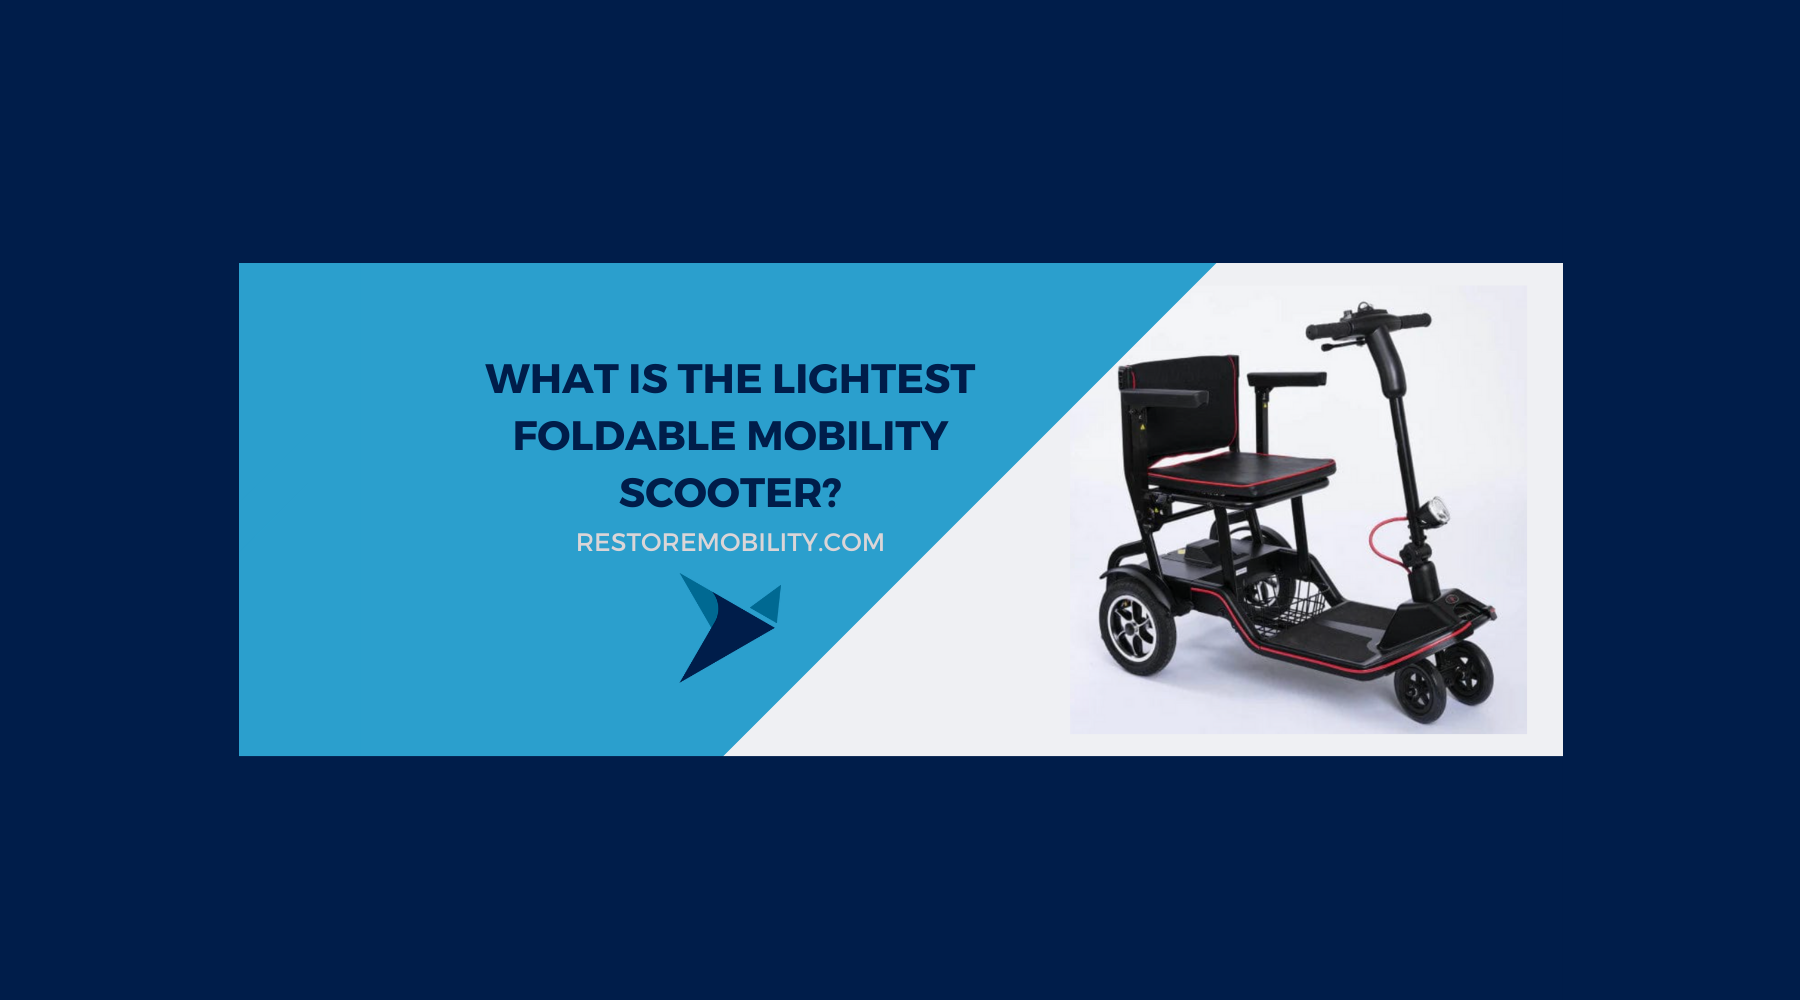 What is the Lightest Foldable Mobility Scooter?